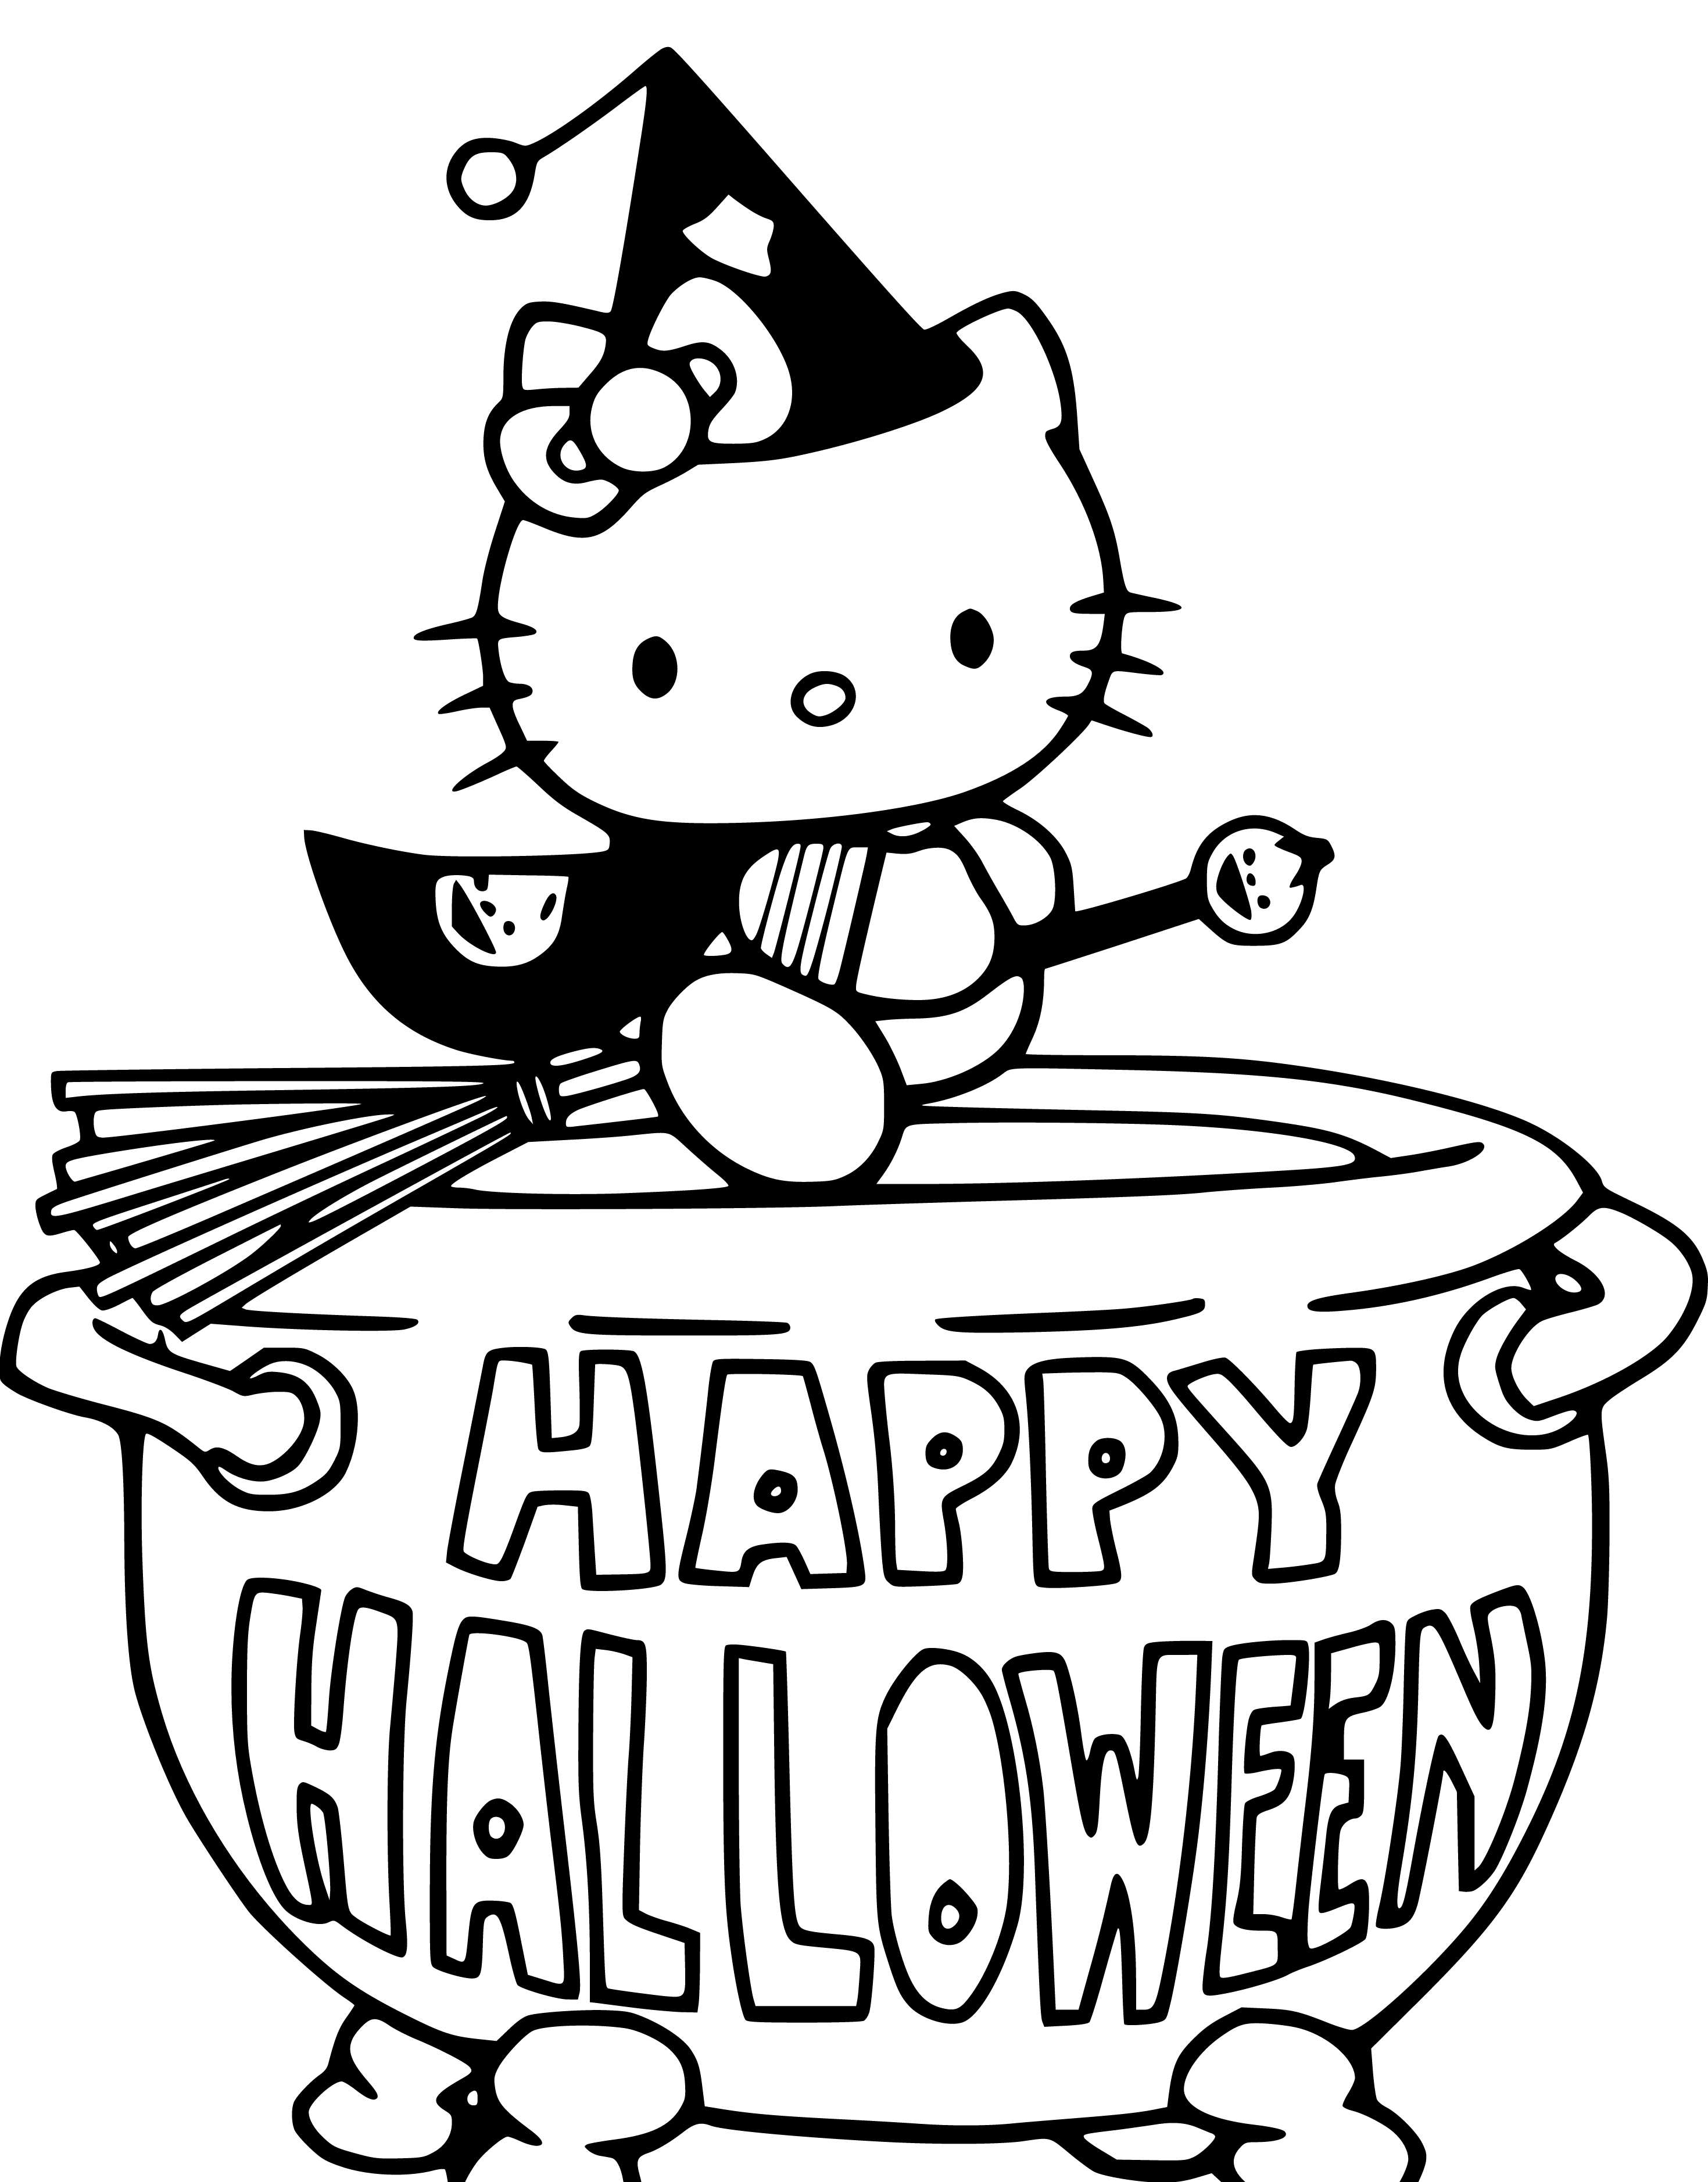 Printable Hello Kitty Happy Halloween Coloring Page for kids.